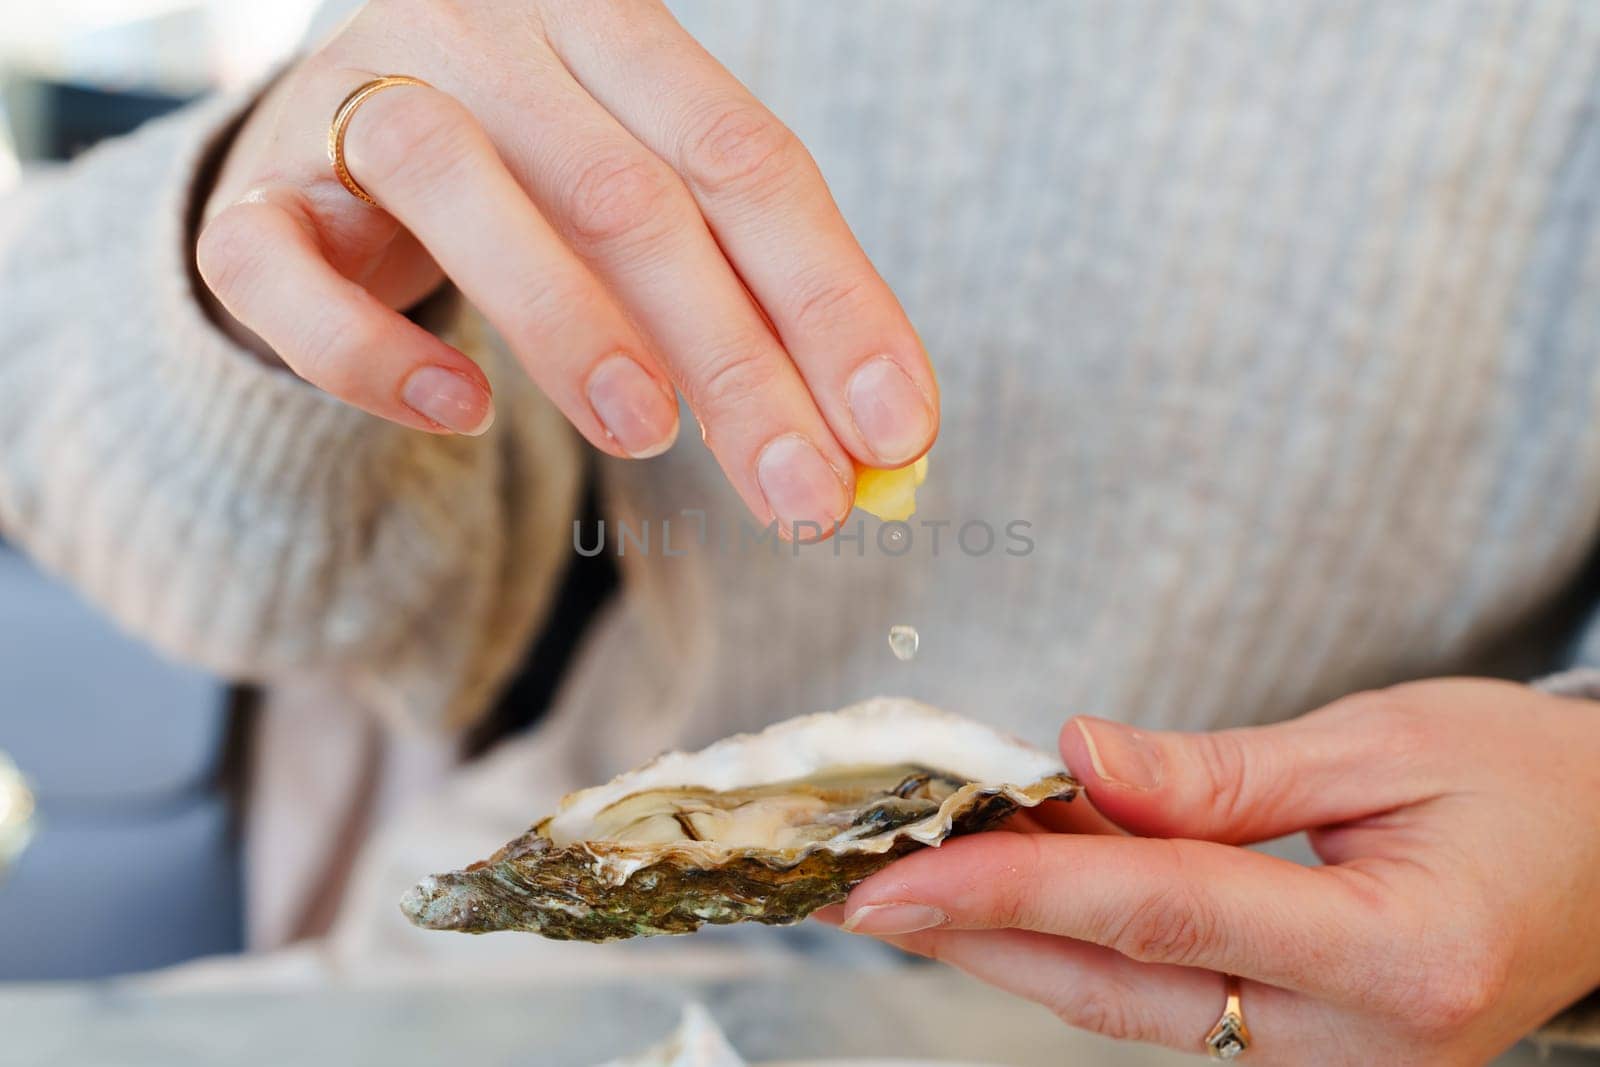 A young girl indulging in a luxurious outdoor picnic, meticulously arranged oysters and lemons served on a plate with fine dining cutlery